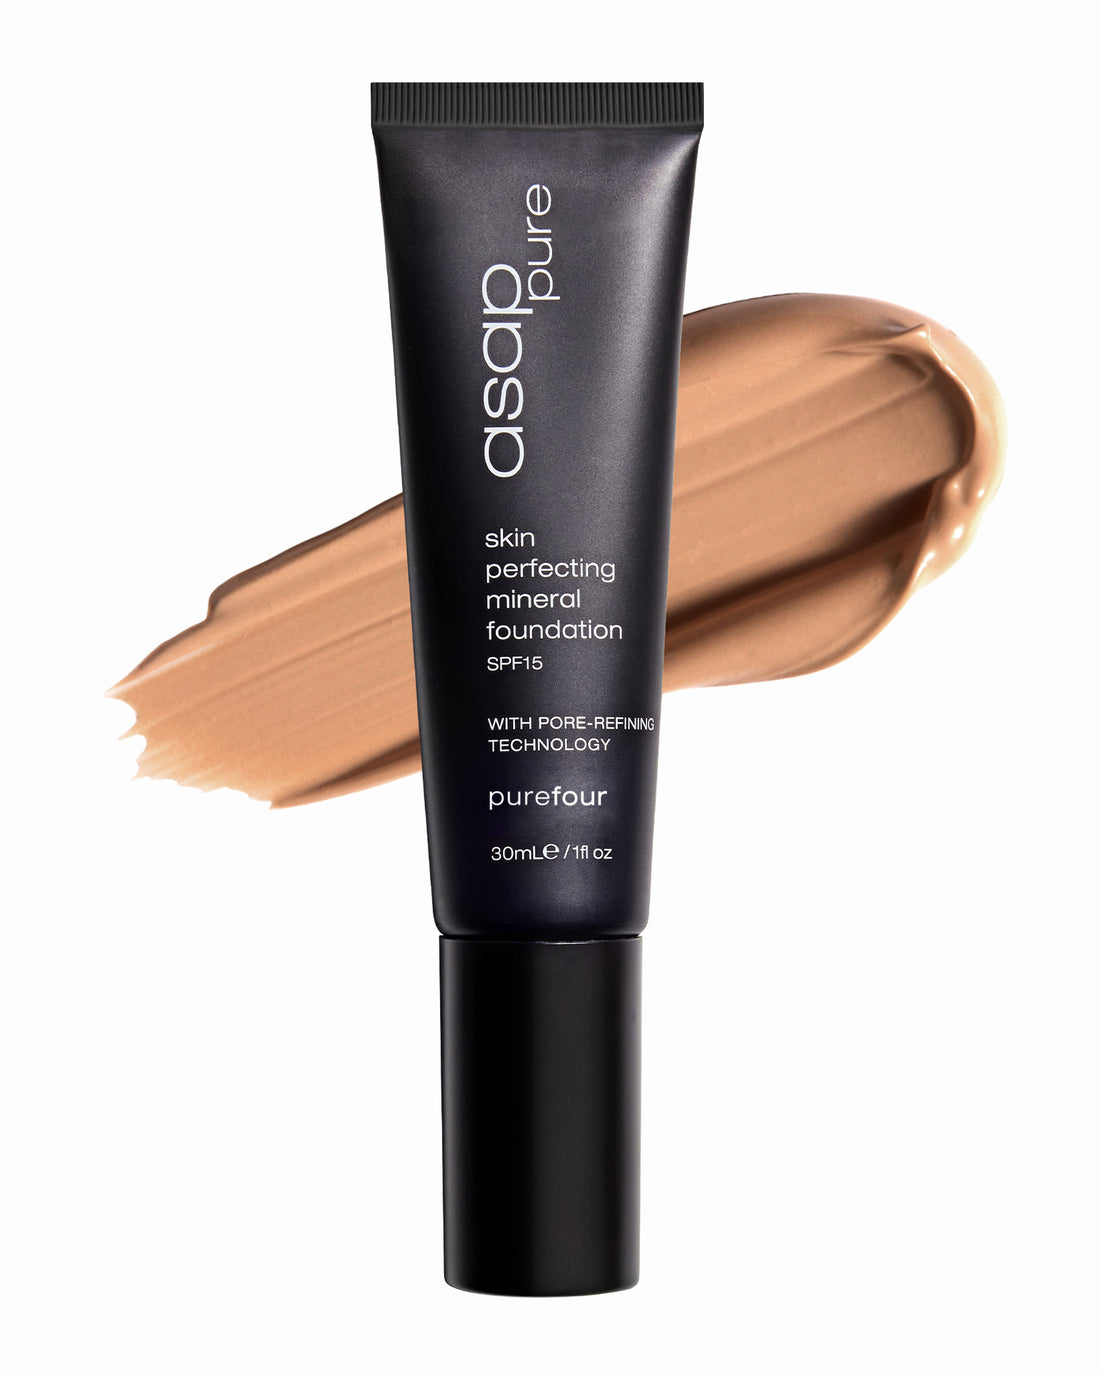 ASAP Skin Perfecting Mineral Foundation - Exquisite Laser Clinic 